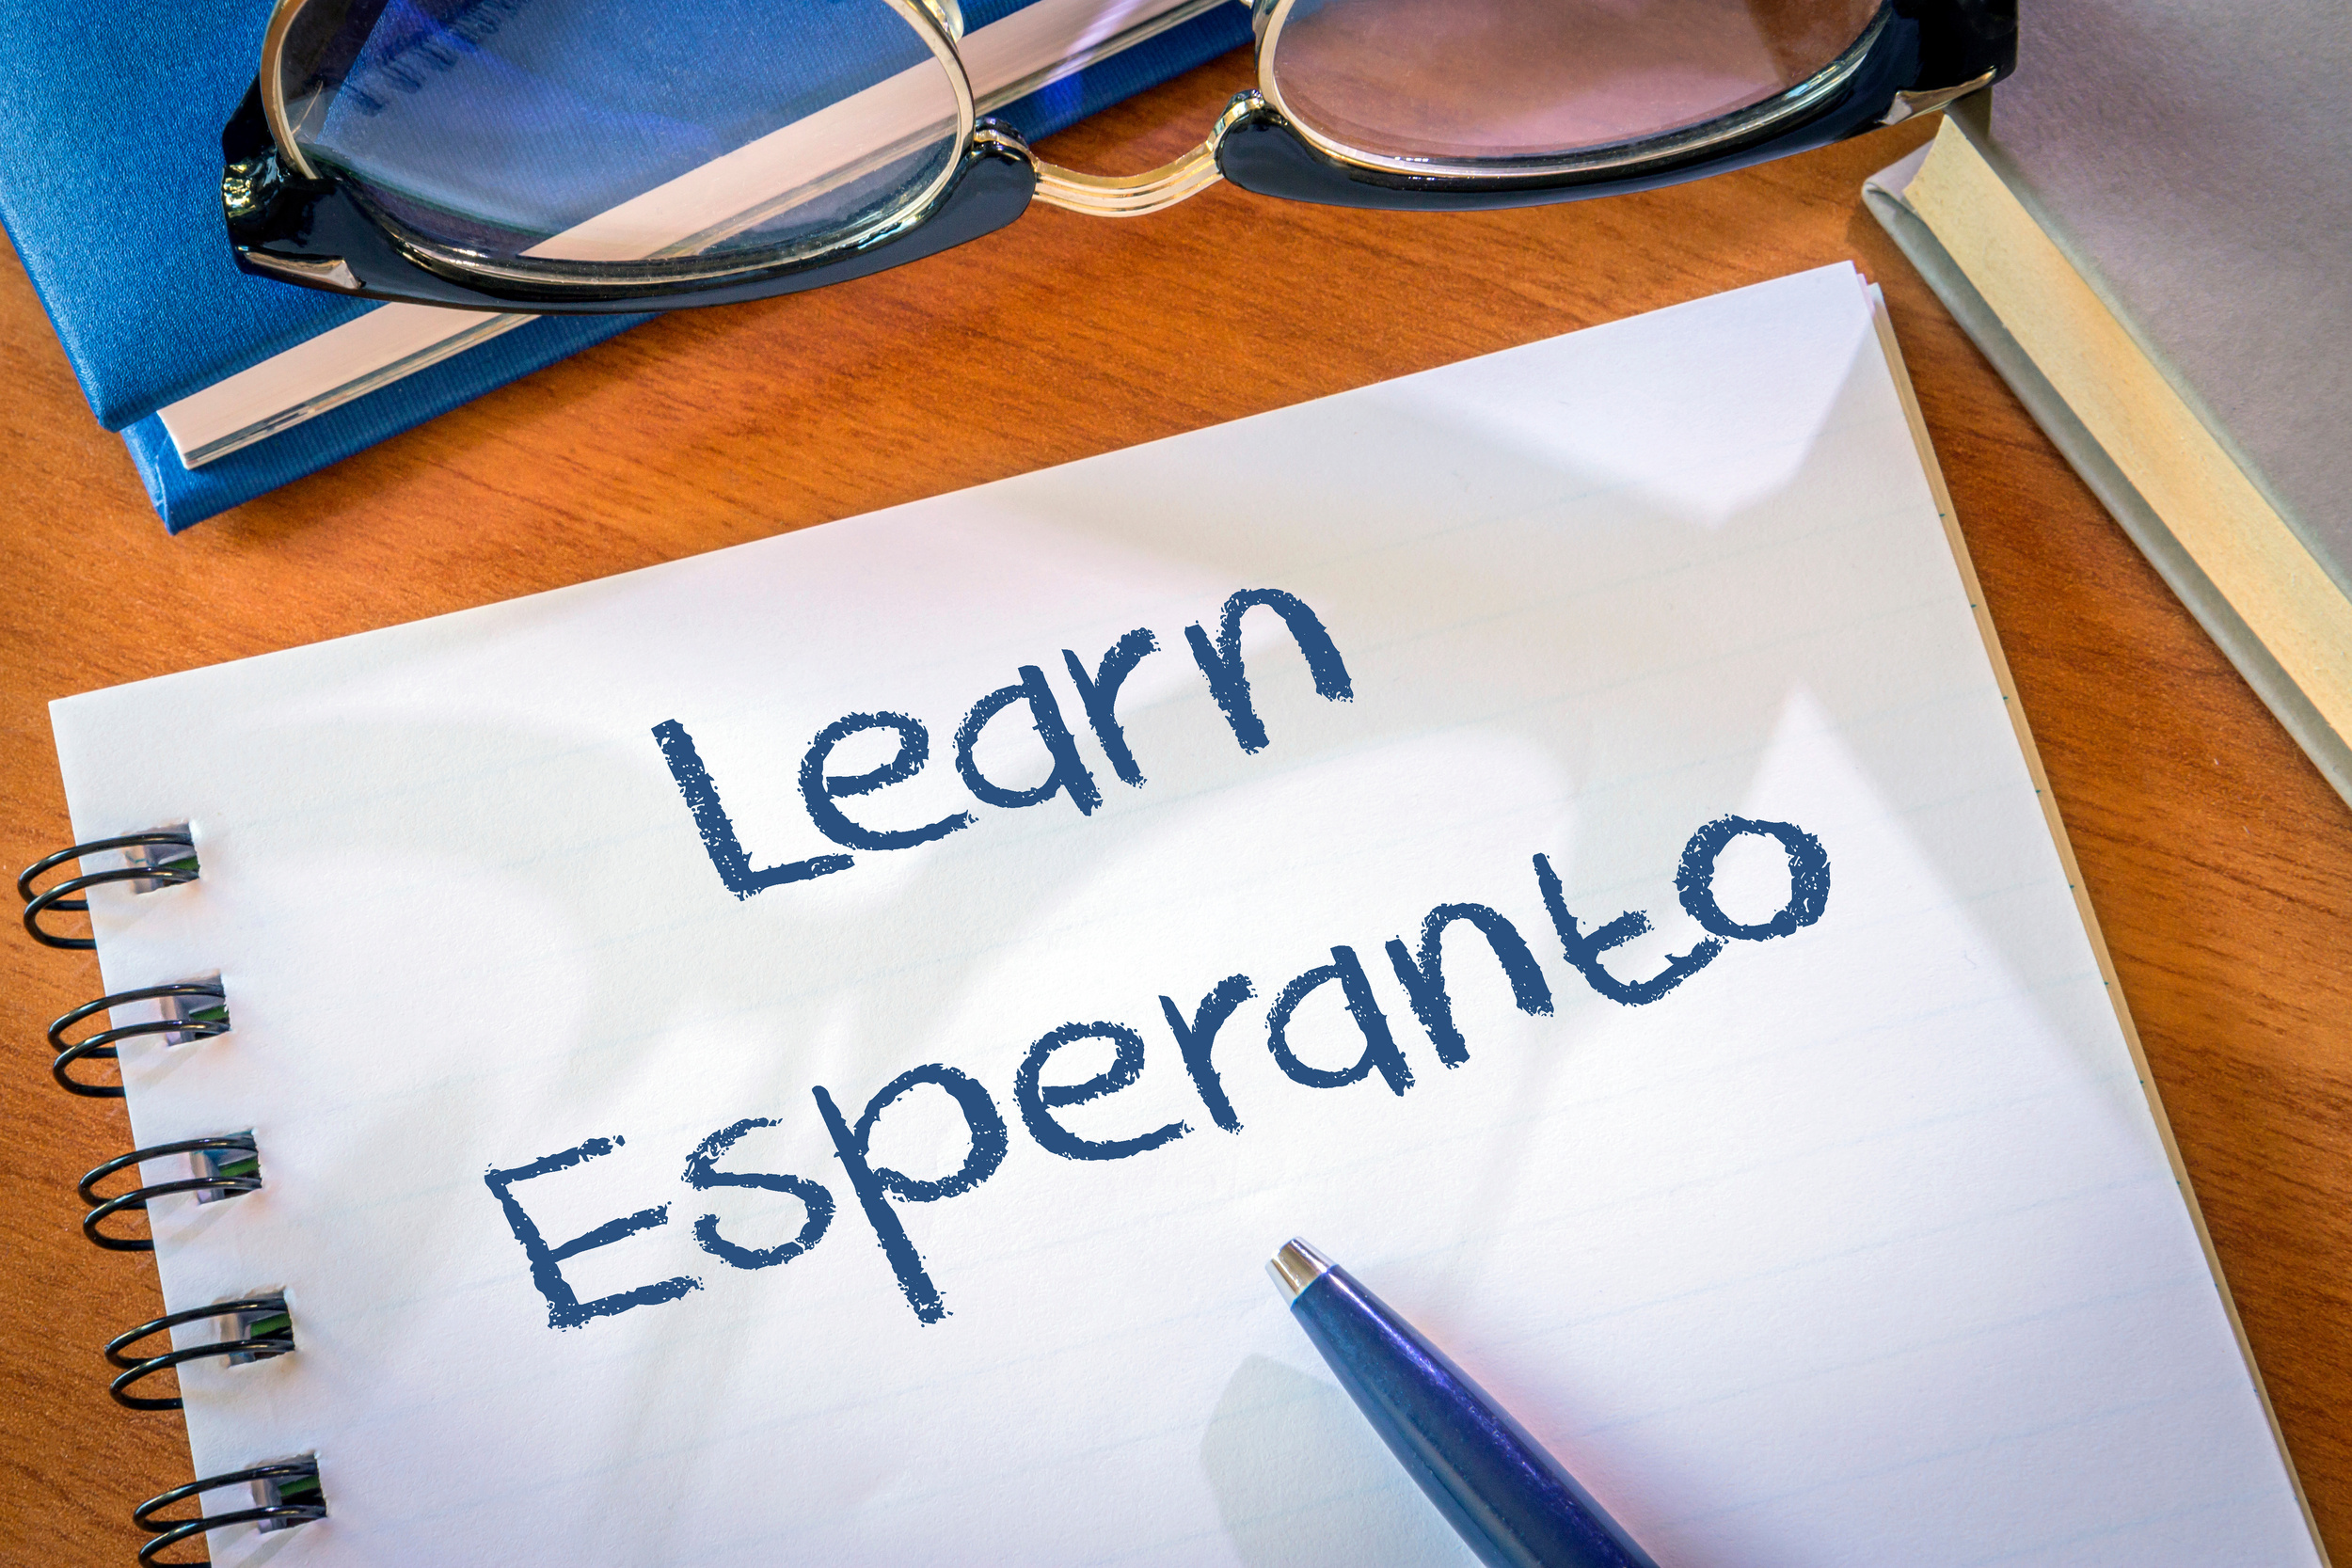 <p>Esperanto isn’t the official language of any country as it was created as an auxiliary language, but that’s what makes it so easy for English speakers to learn. Learning Esperanto will also make it easier to learn other languages. </p><p>You may also like: <a href='https://www.yardbarker.com/lifestyle/articles/the_14_most_beautiful_beach_towns_on_the_west_coast/s1__38578337'>The 14 most beautiful beach towns on the West Coast</a></p>